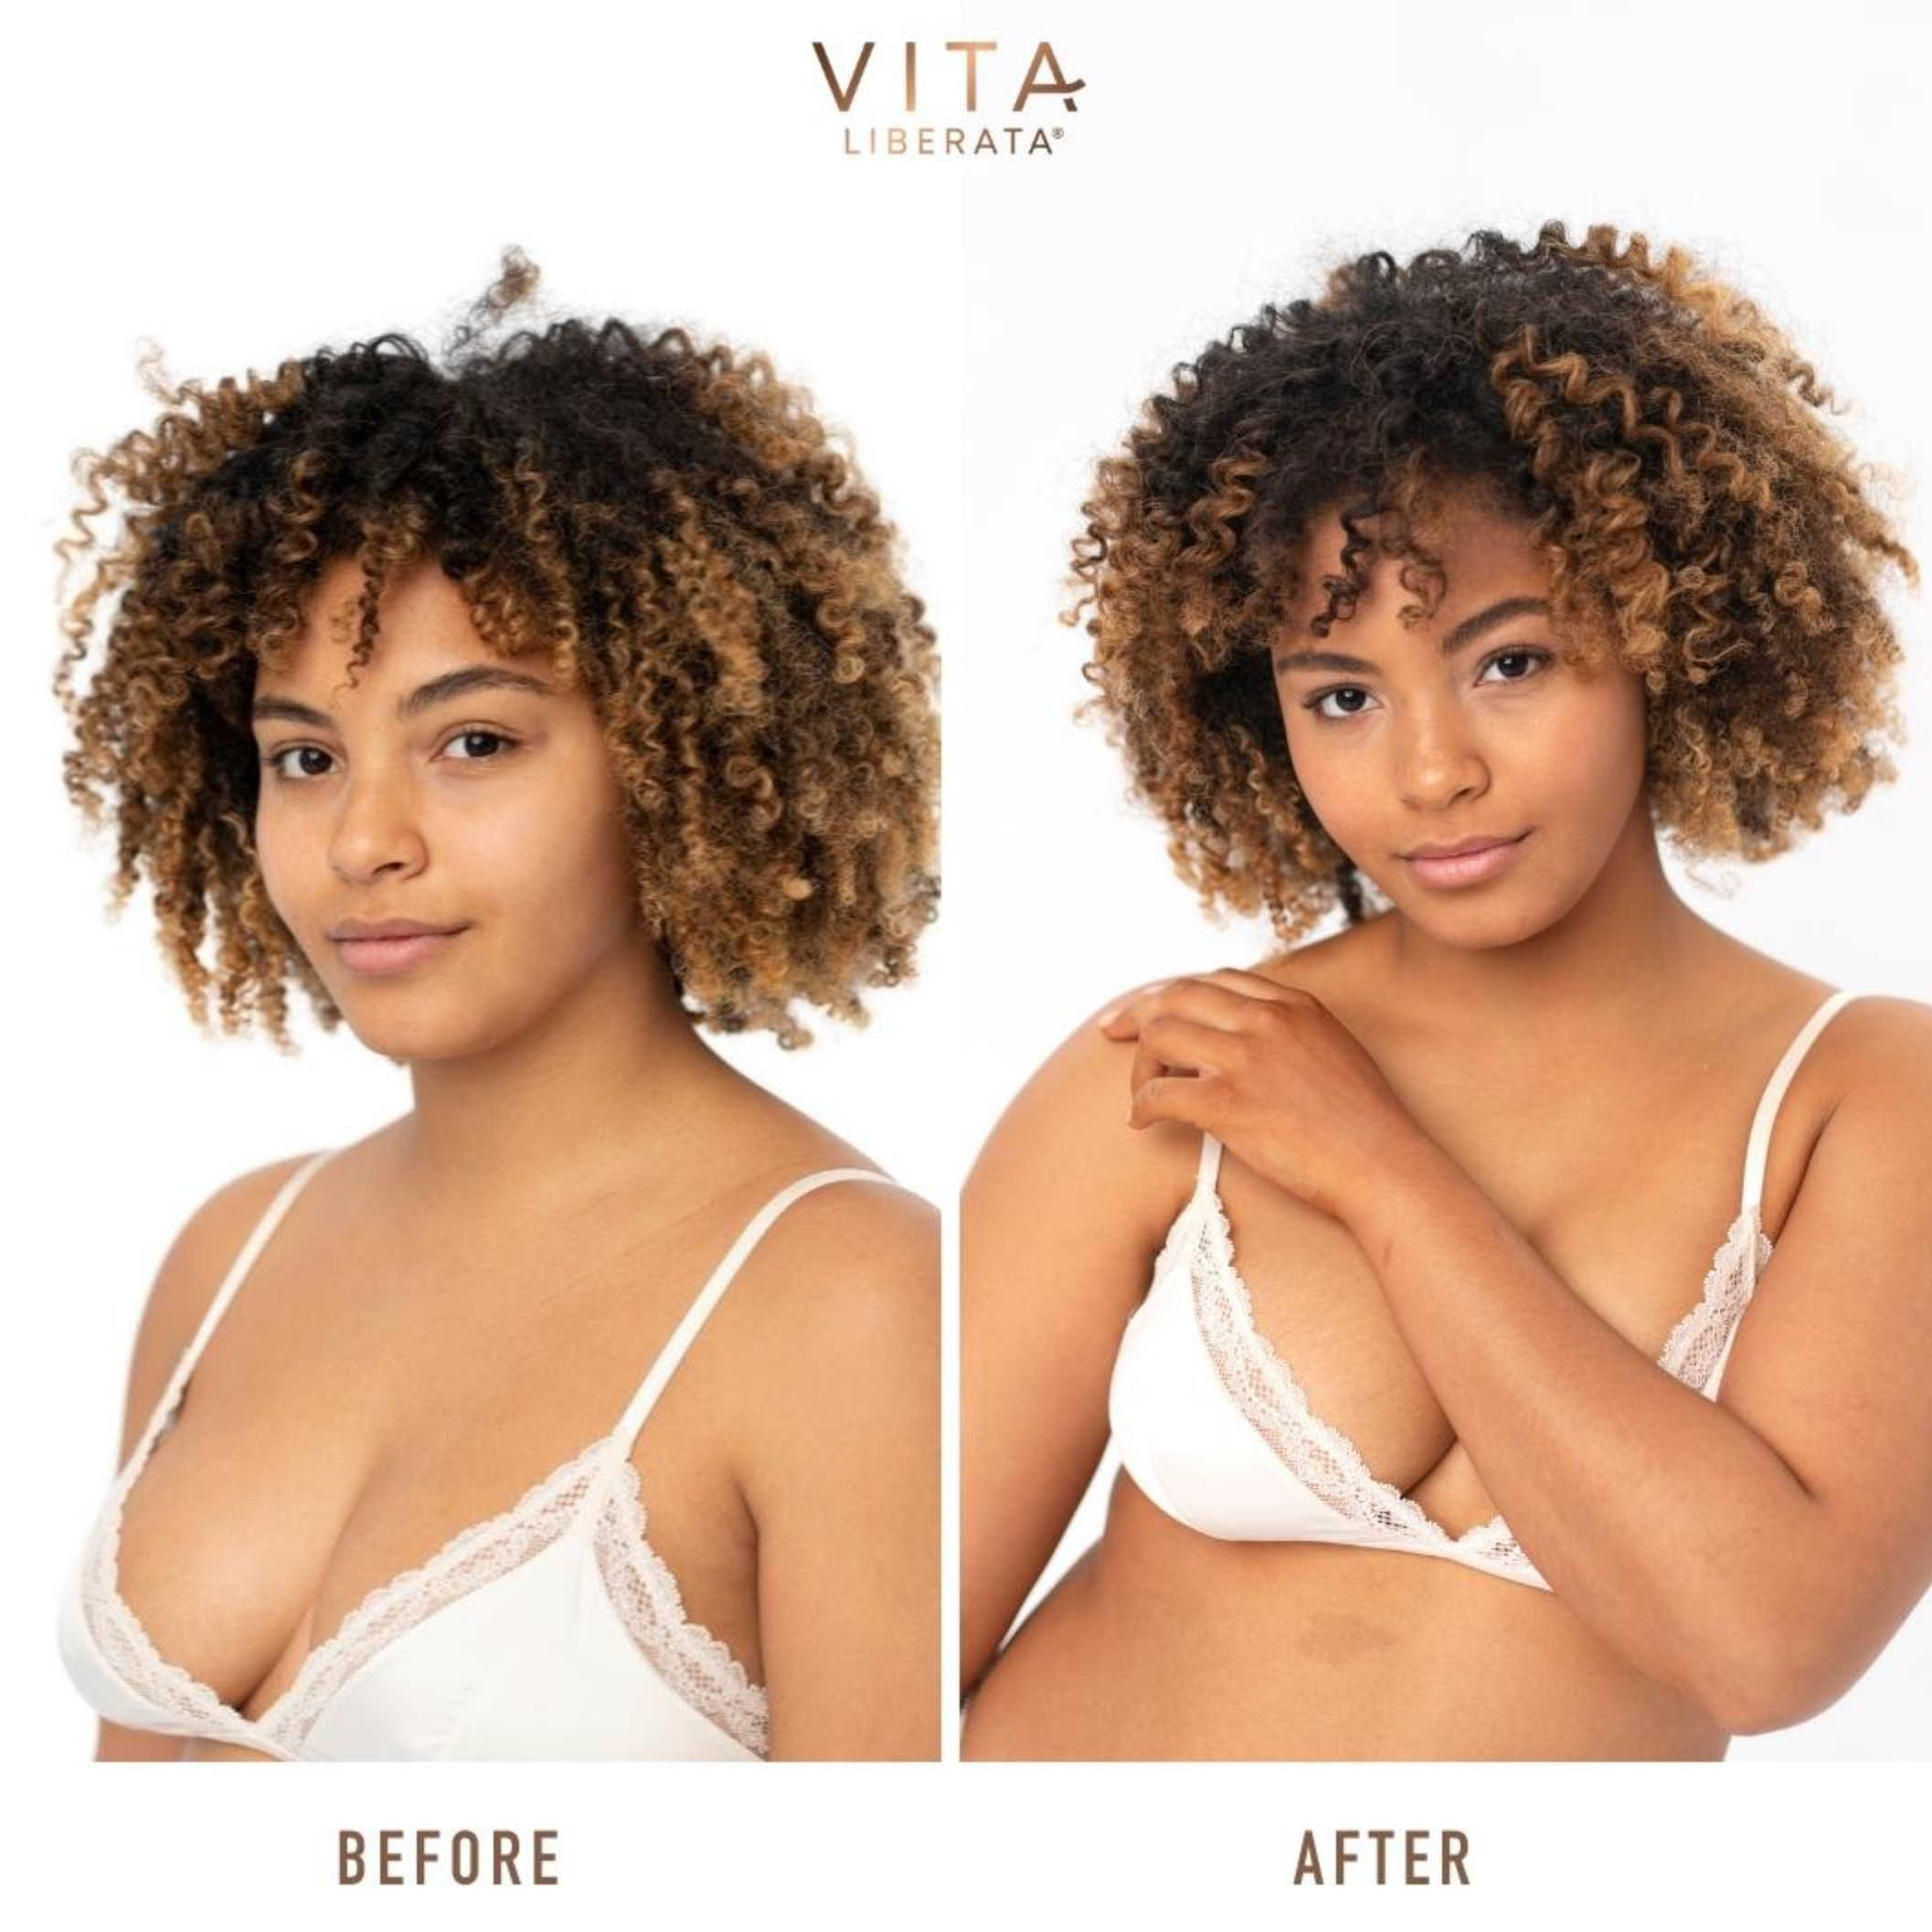 Before and after Vita Liberata Untinted Heavenly Tanning Elixir - Medium